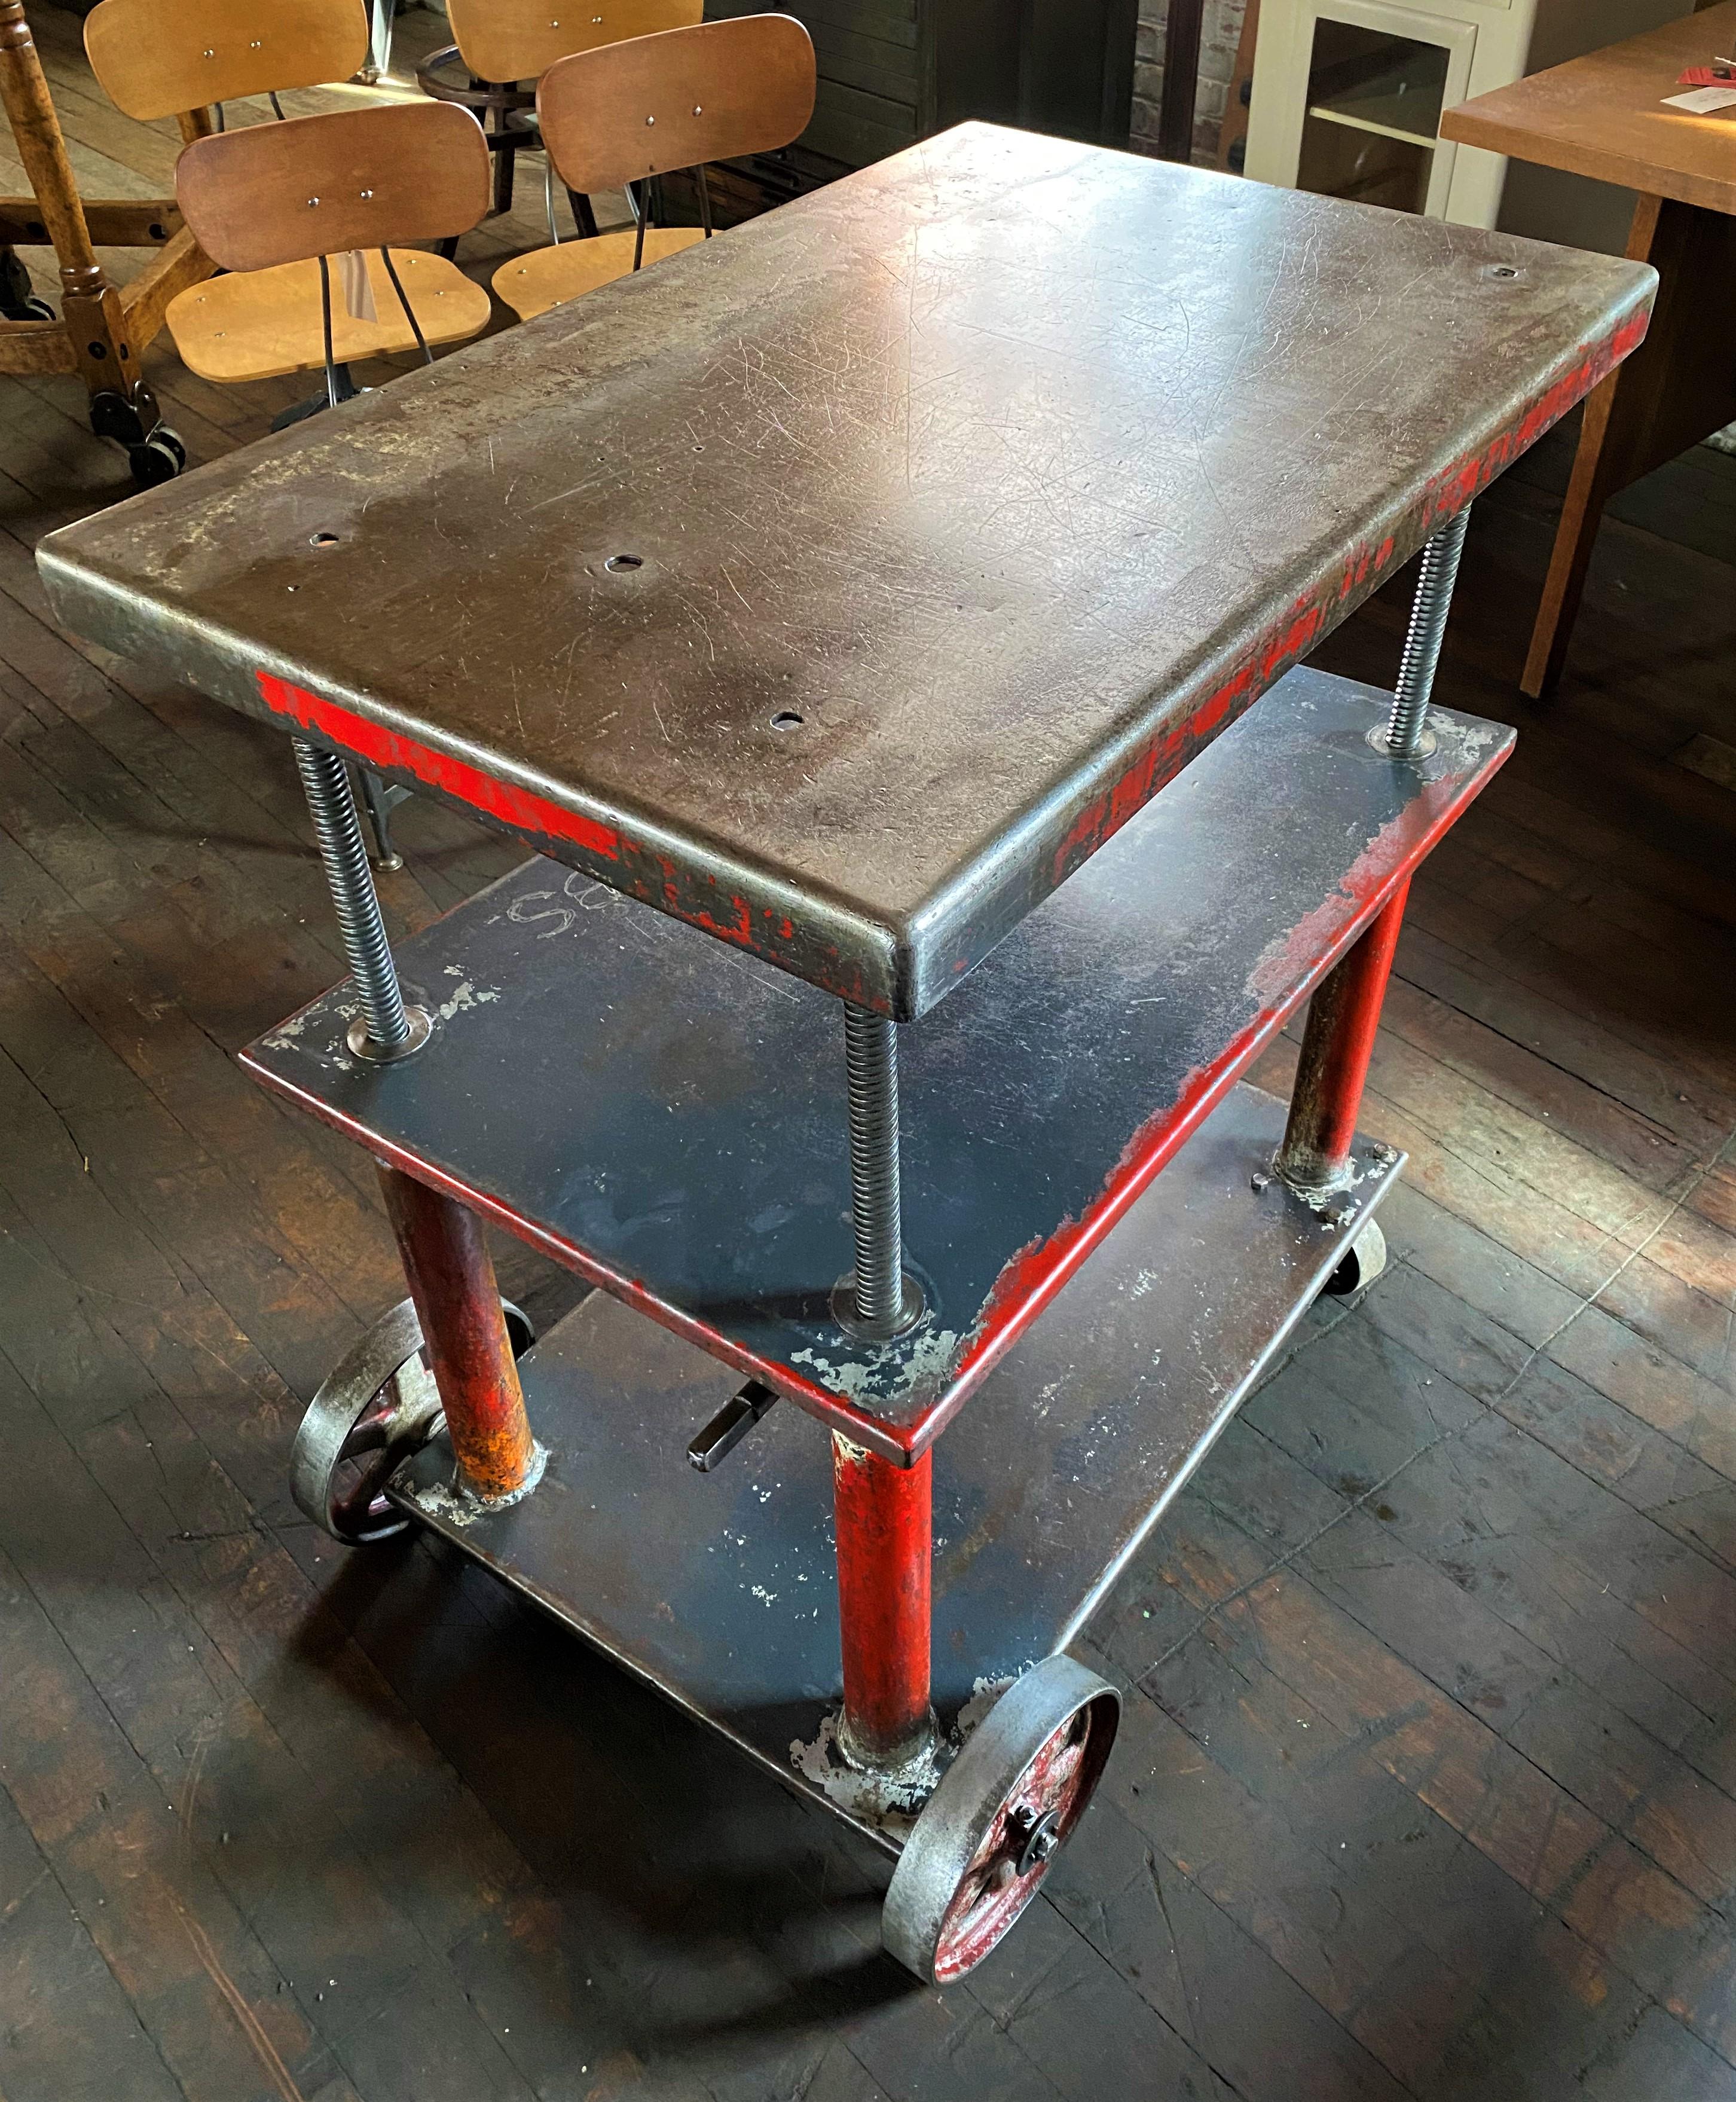 Adjustable steel industrial cart.
Overall dimensions: 22